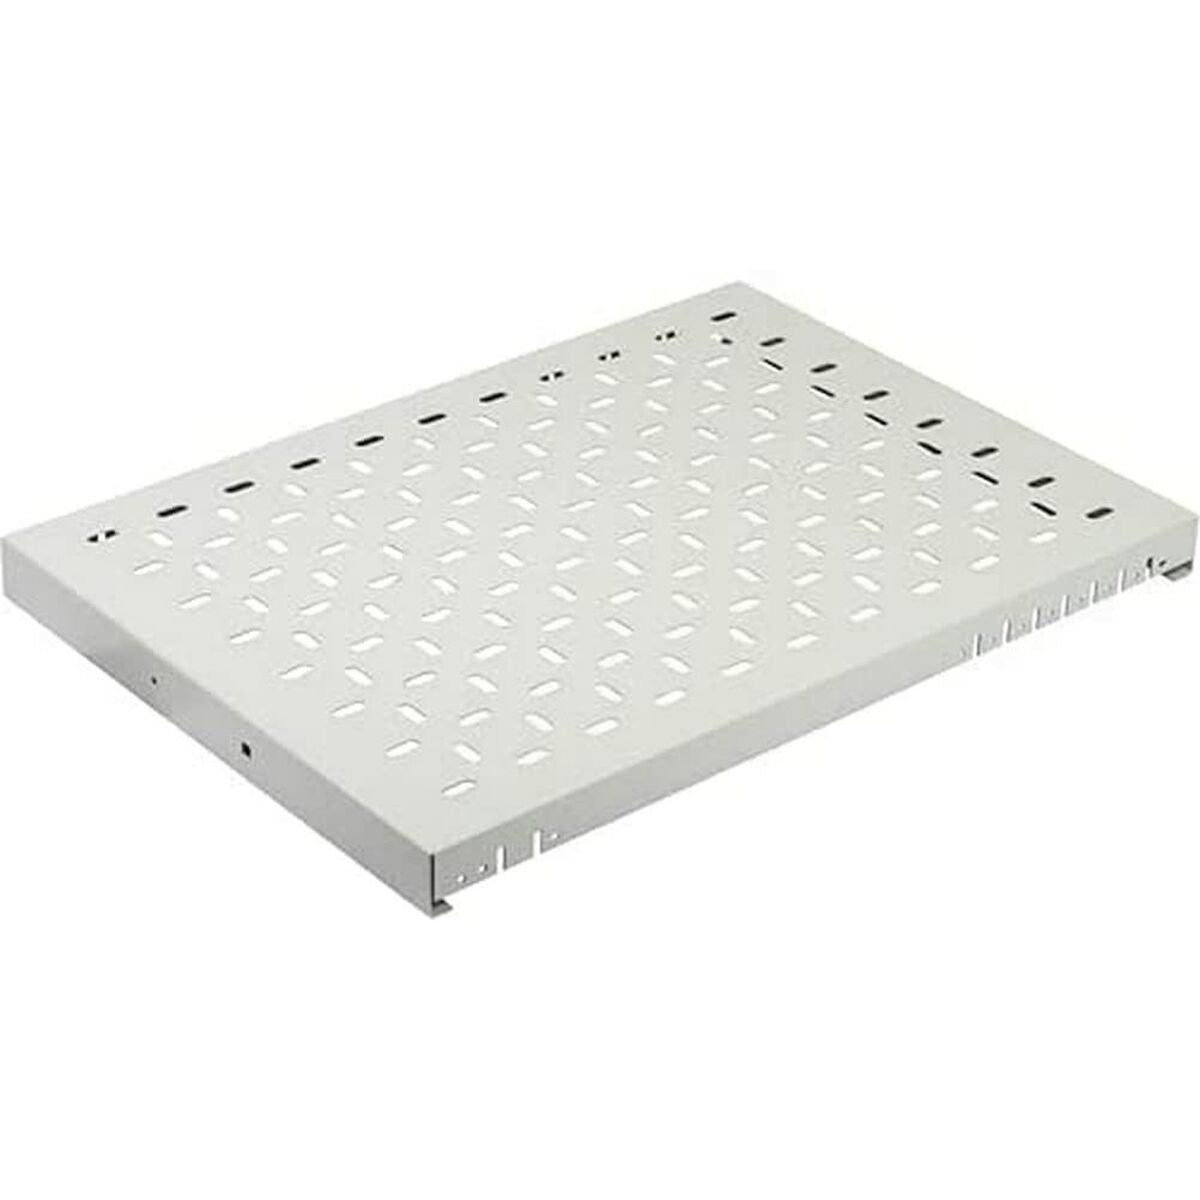 Fixed Tray for Rack Cabinet APC, APC, Computing, Accessories, fixed-tray-for-rack-cabinet-apc-1, Brand_APC, category-reference-2609, category-reference-2803, category-reference-2828, category-reference-t-19685, category-reference-t-19908, category-reference-t-21349, Condition_NEW, furniture, networks/wiring, organisation, Price_50 - 100, Teleworking, RiotNook